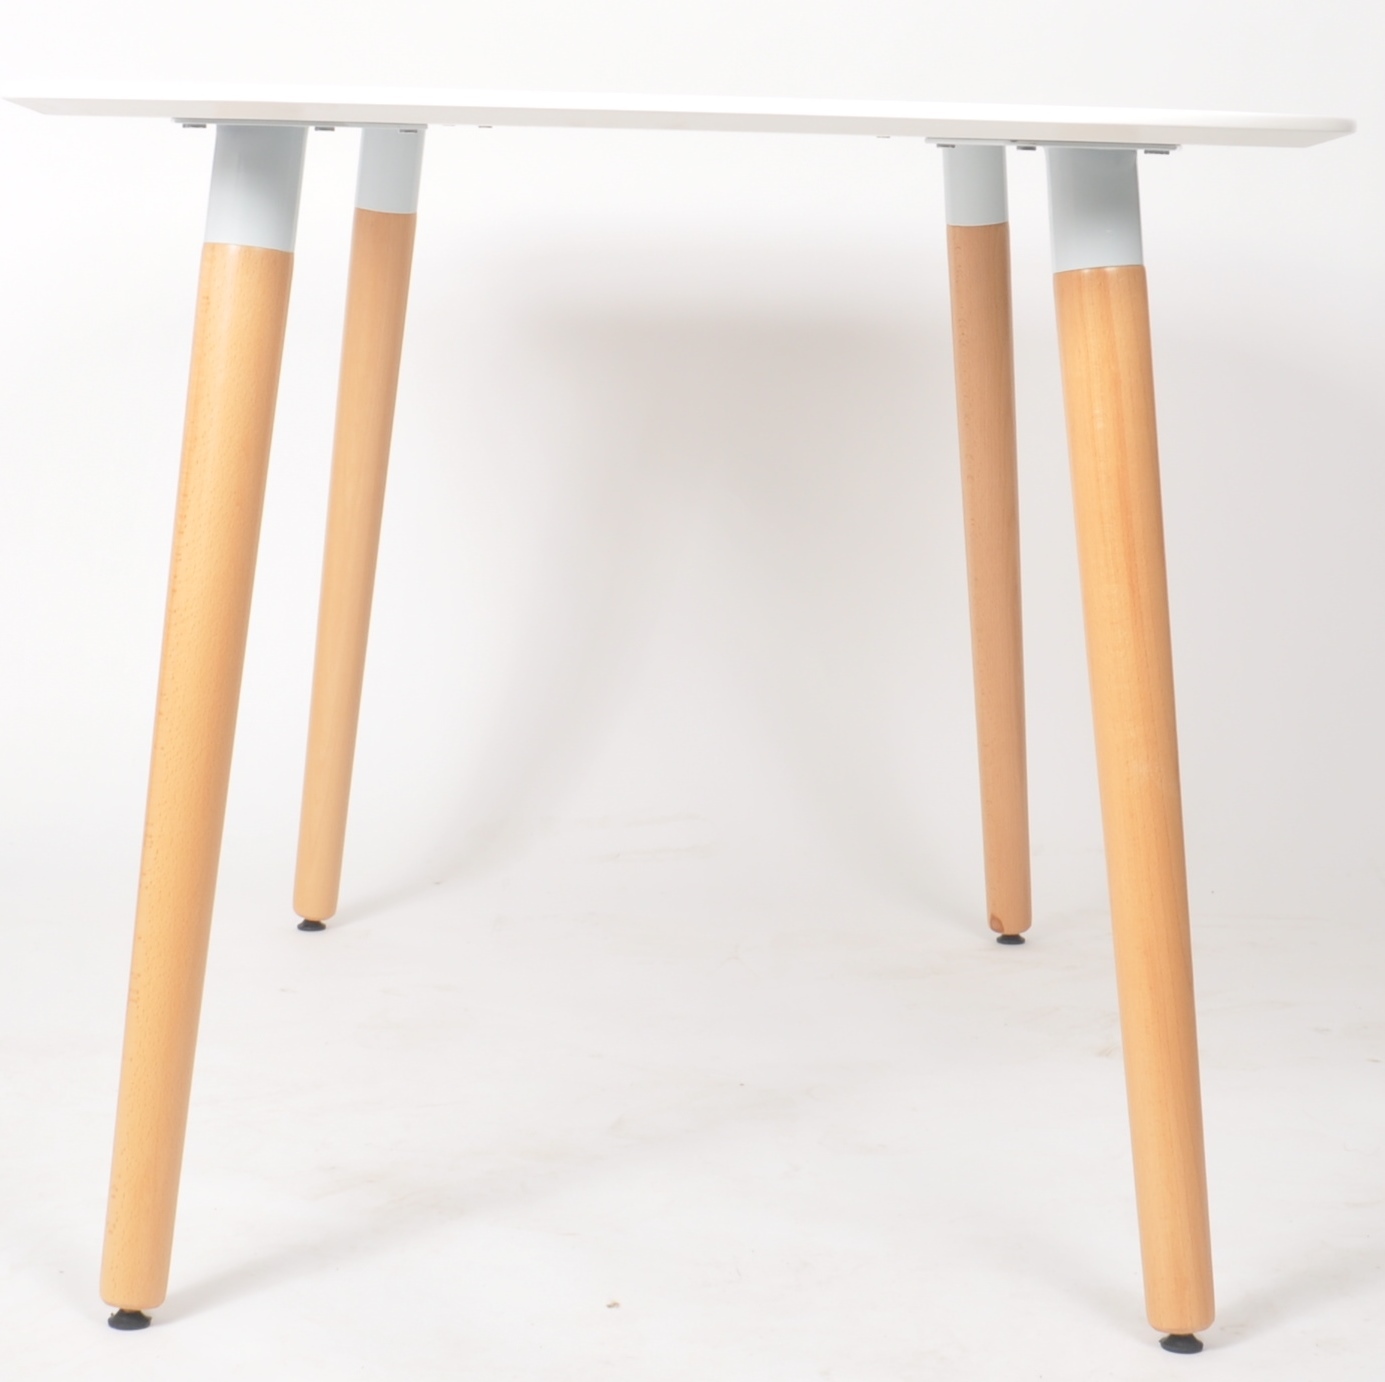 CONTEMPORARY SCANDINAVIAN INFLUENCED DINING TABLE - Image 6 of 6